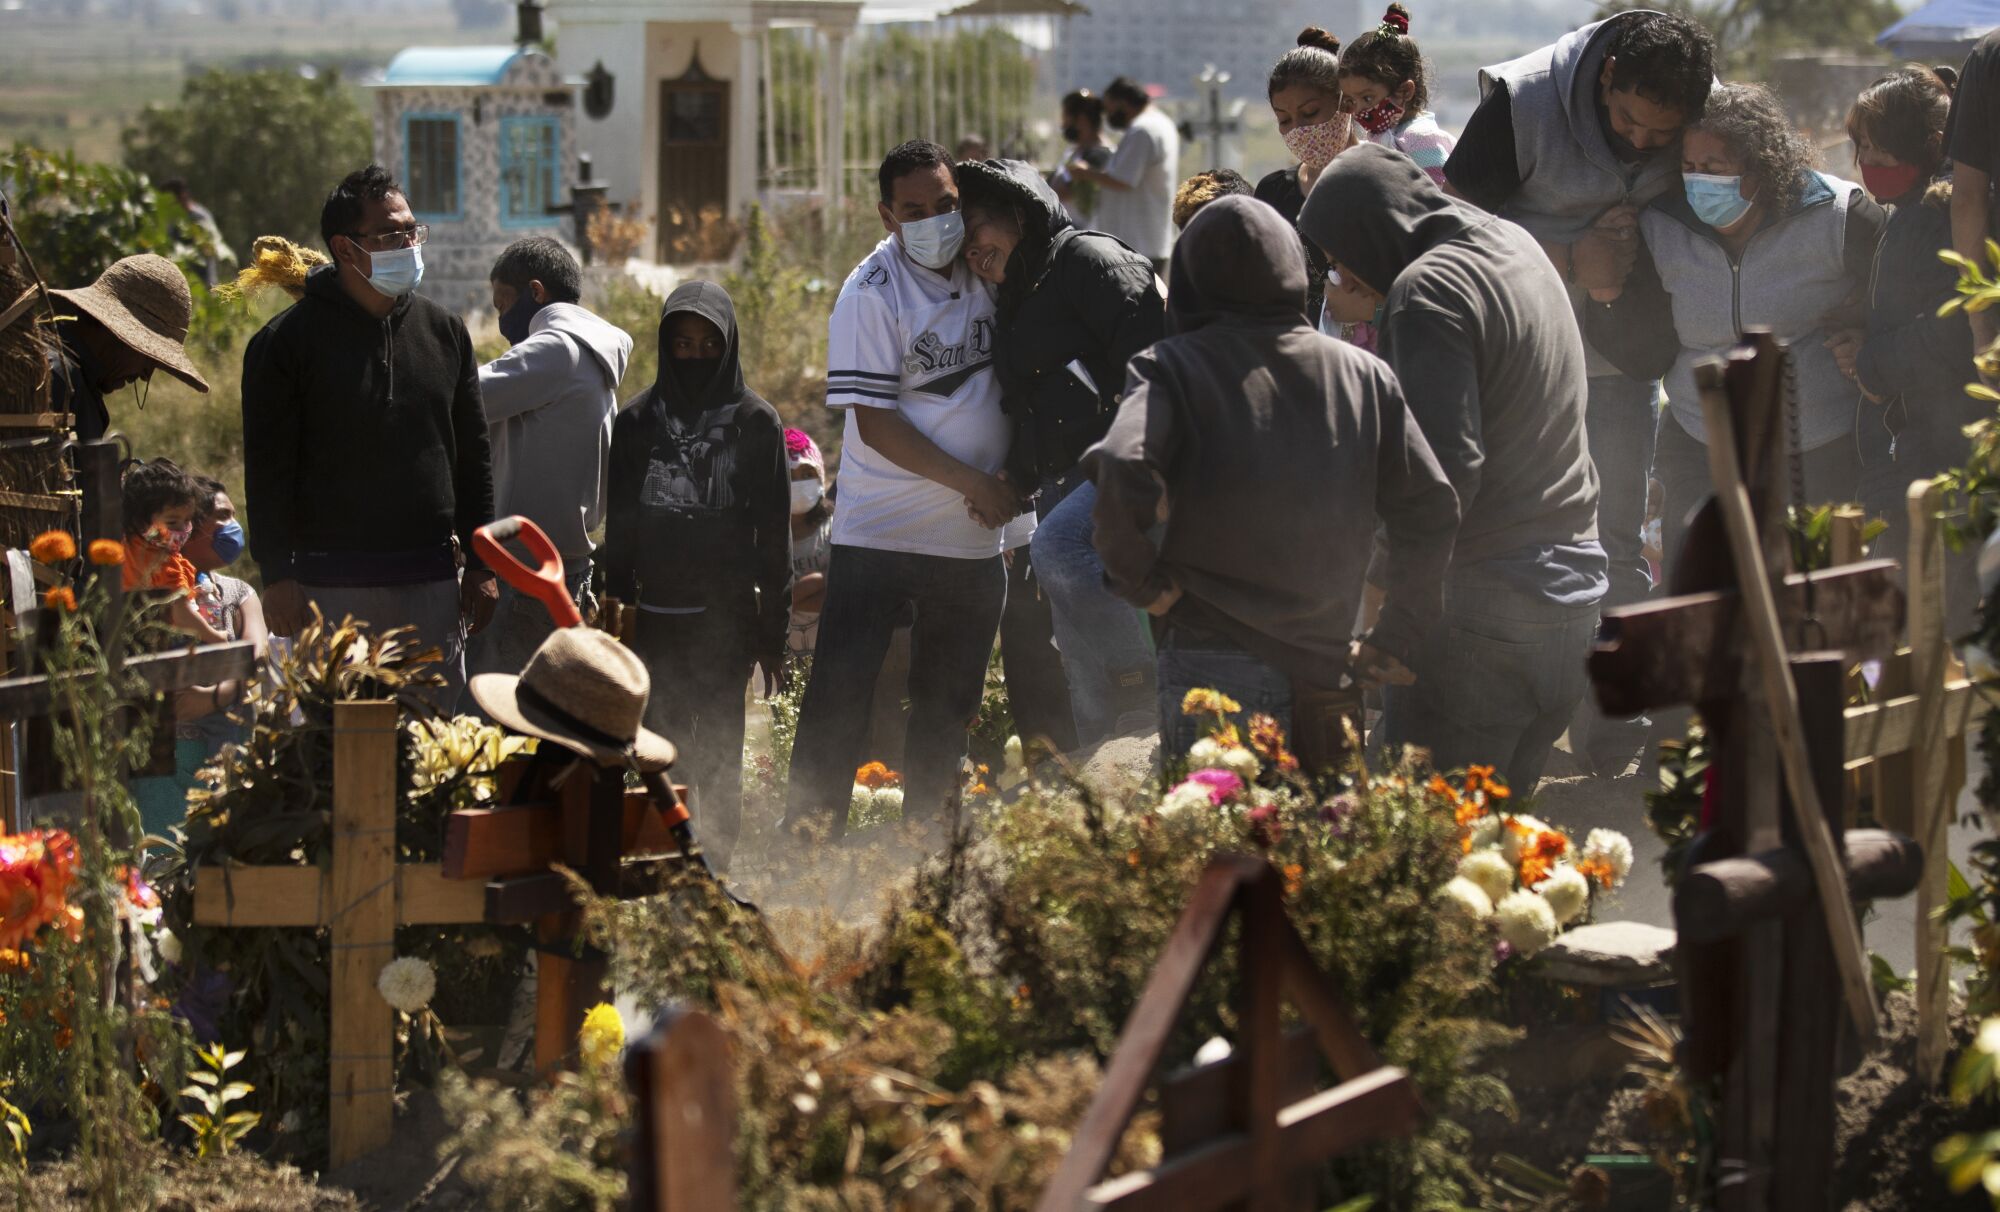 A group of people stand around a gravesite